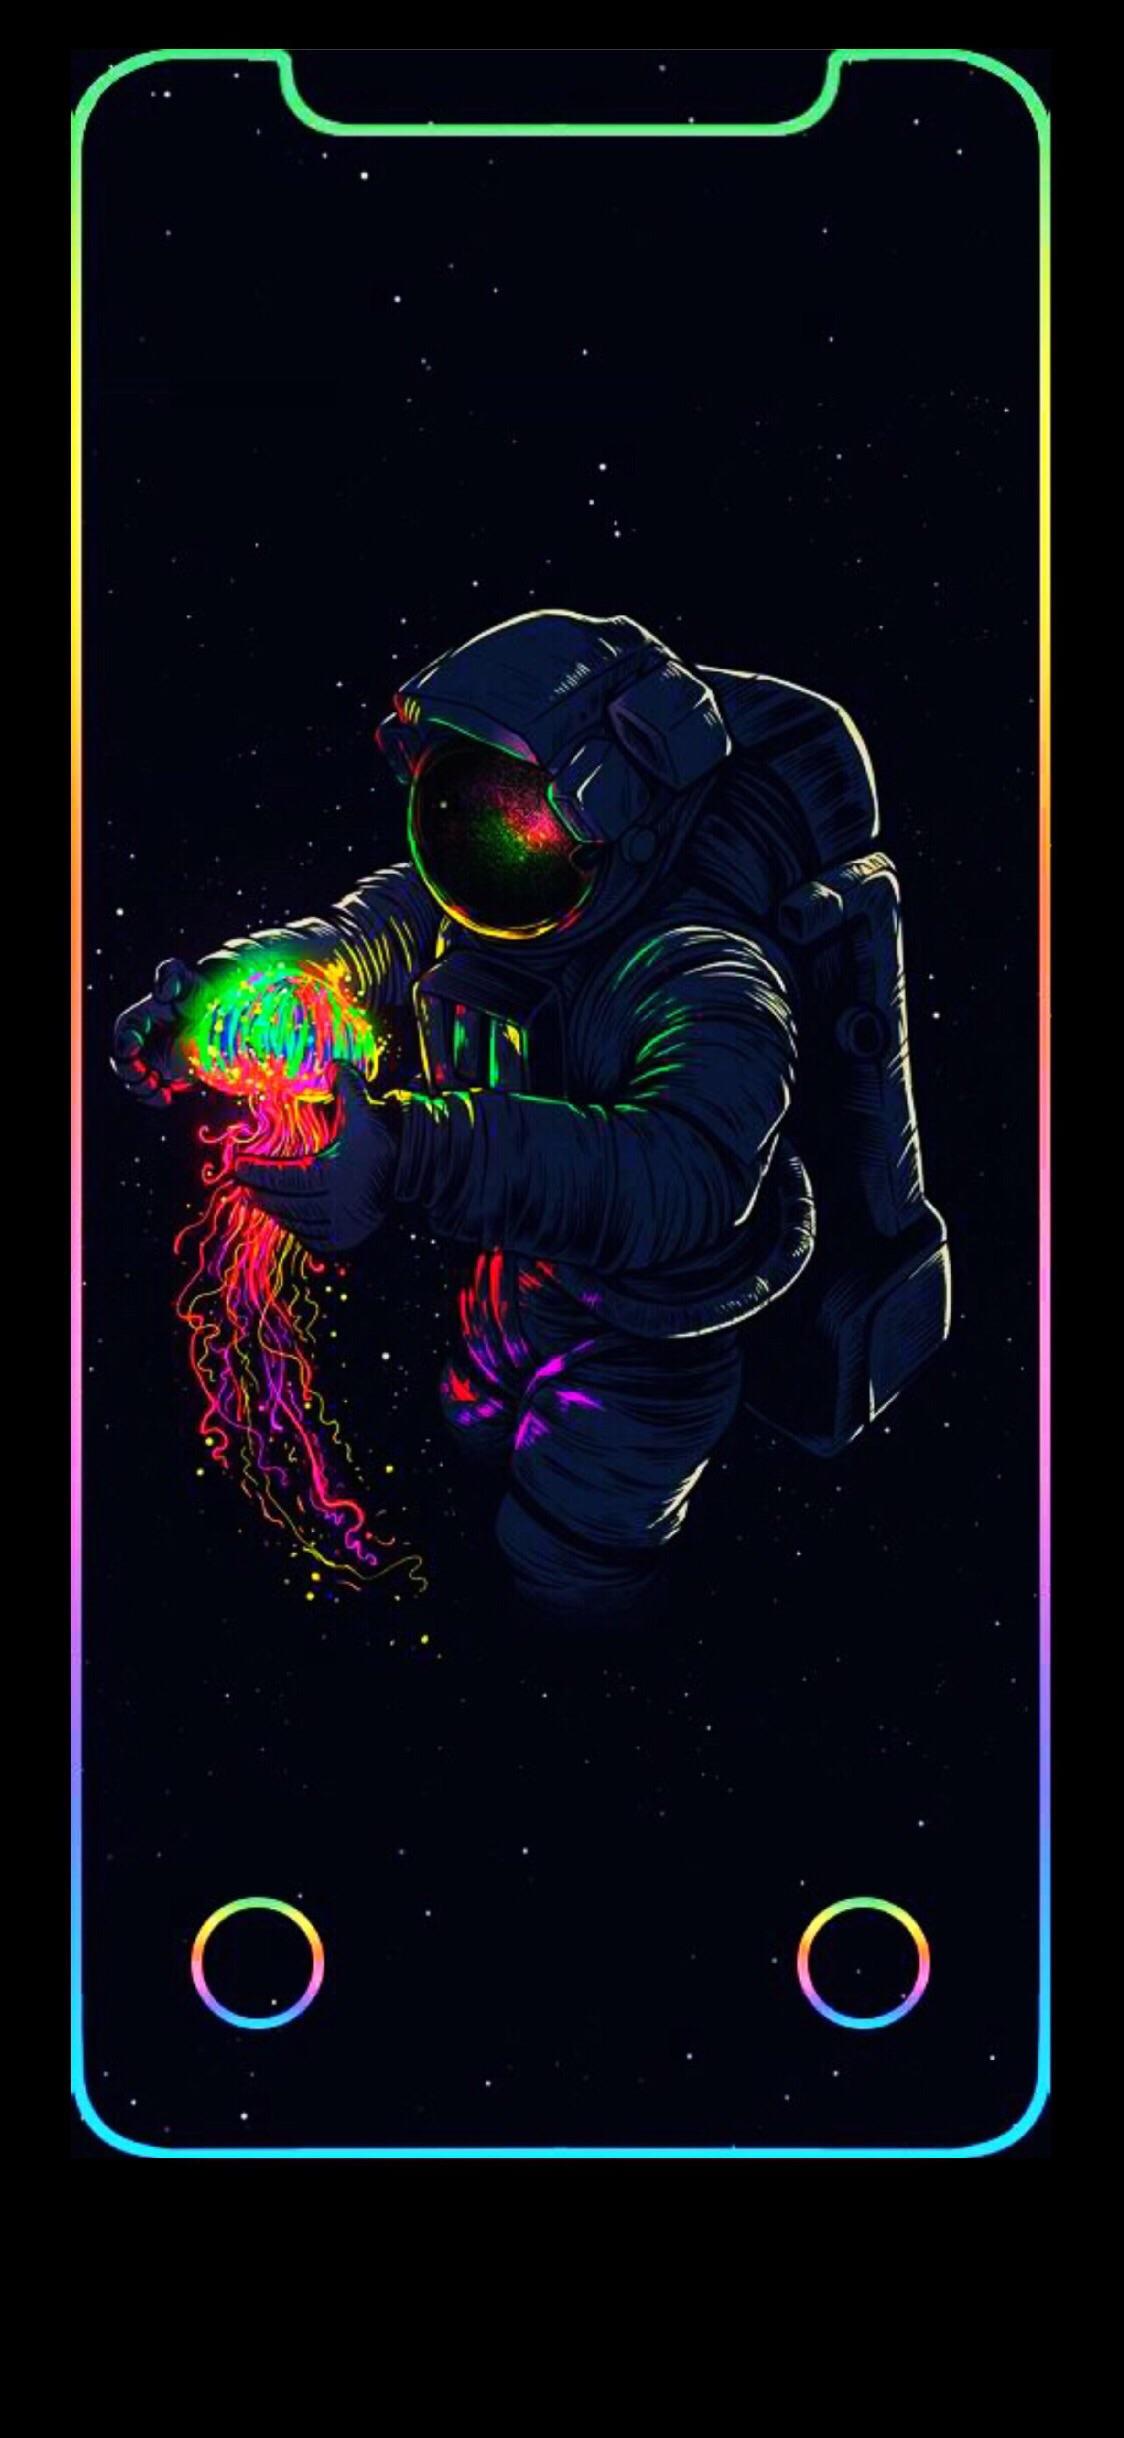 The Light in space. iPhone X Wallpaper X Wallpaper HD